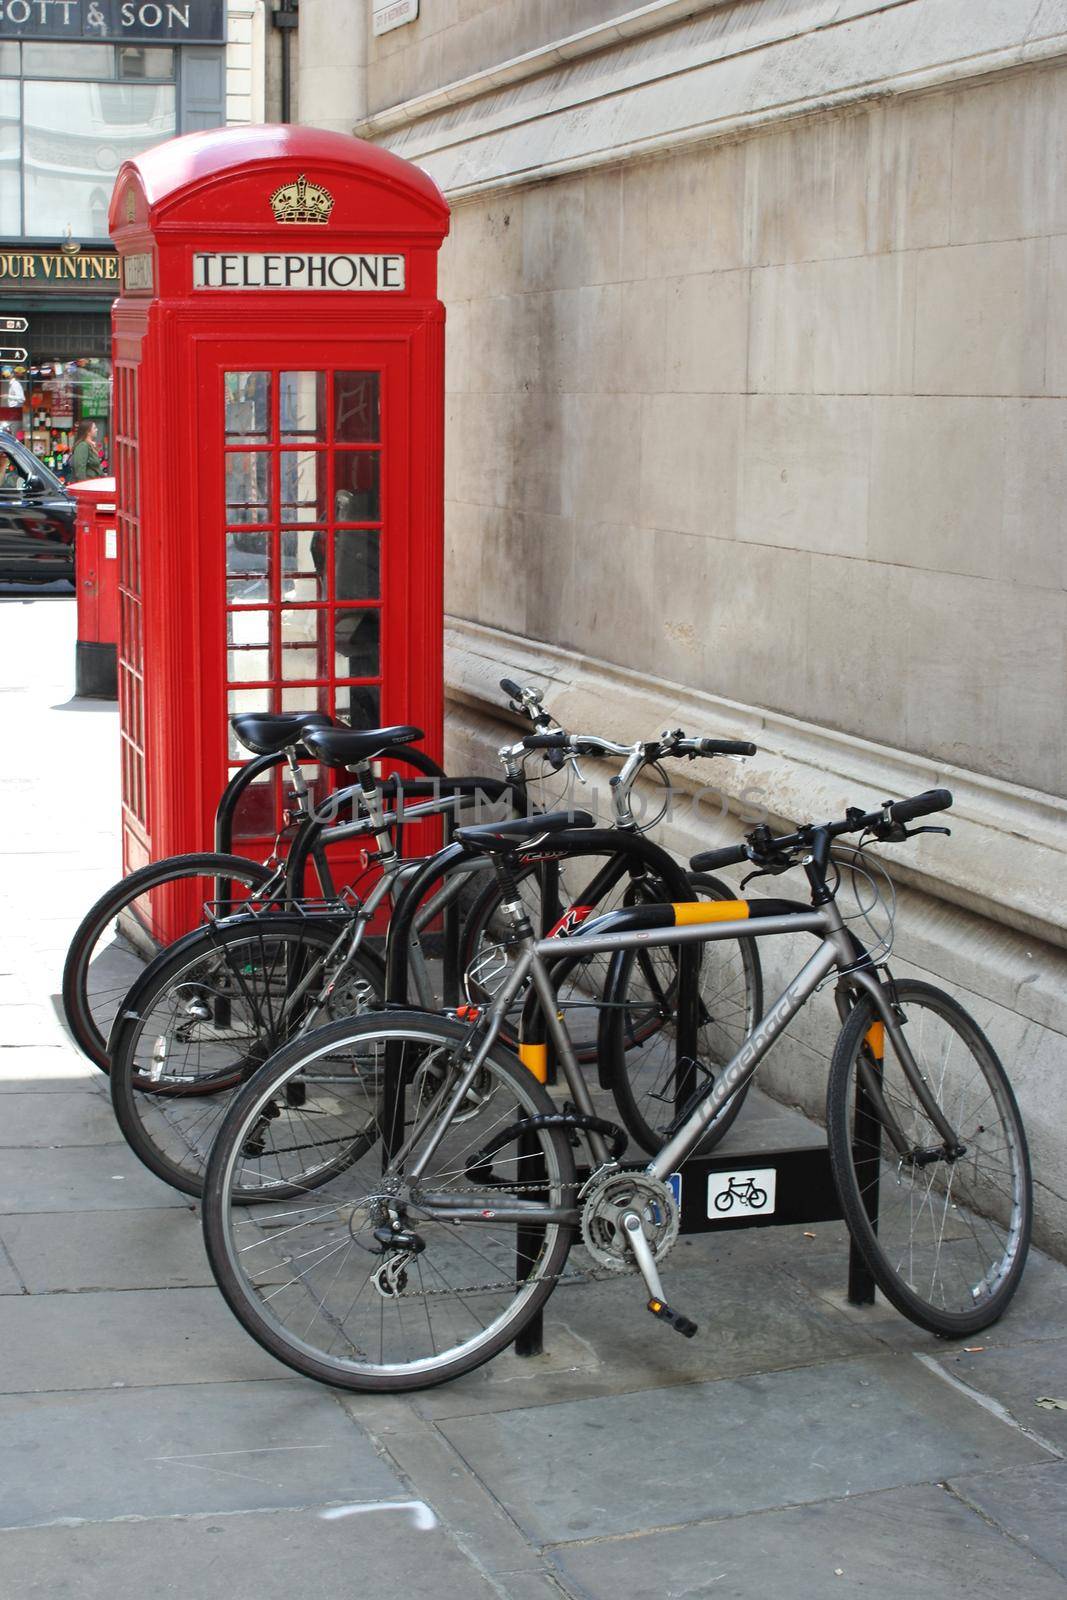 Bicycles and a red london telephone box by VivacityImages